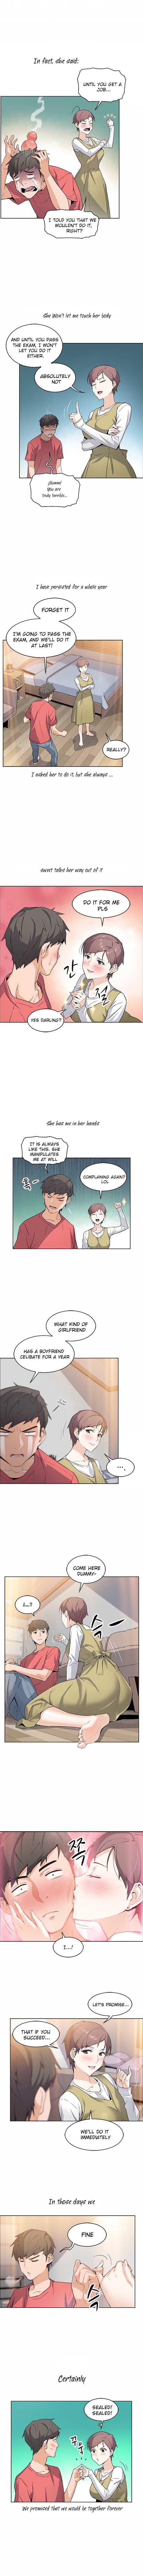 Female Orgasm Housekeeper [Neck Pillow, Paper] Ch.49/49 [English] [Manhwa PDF] Completed Anal Gape - Page 7